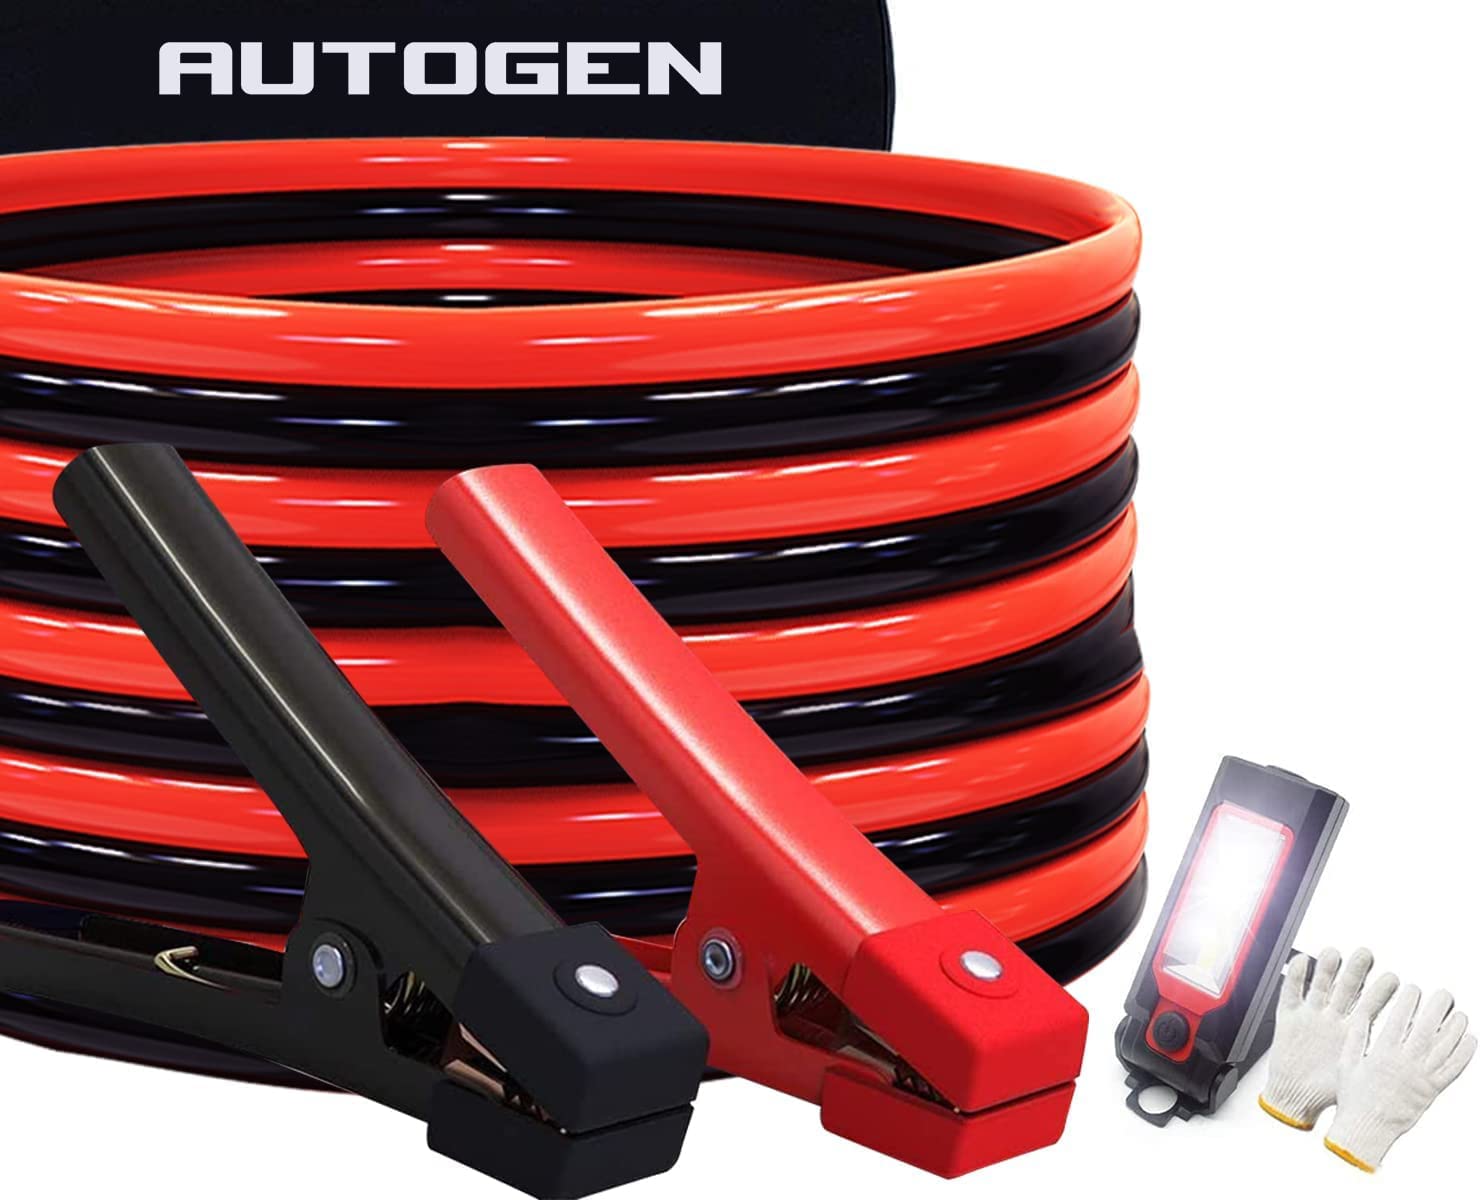 AUTOGEN Heavy Duty Jumper Cables, Booster Cables 1 [...]